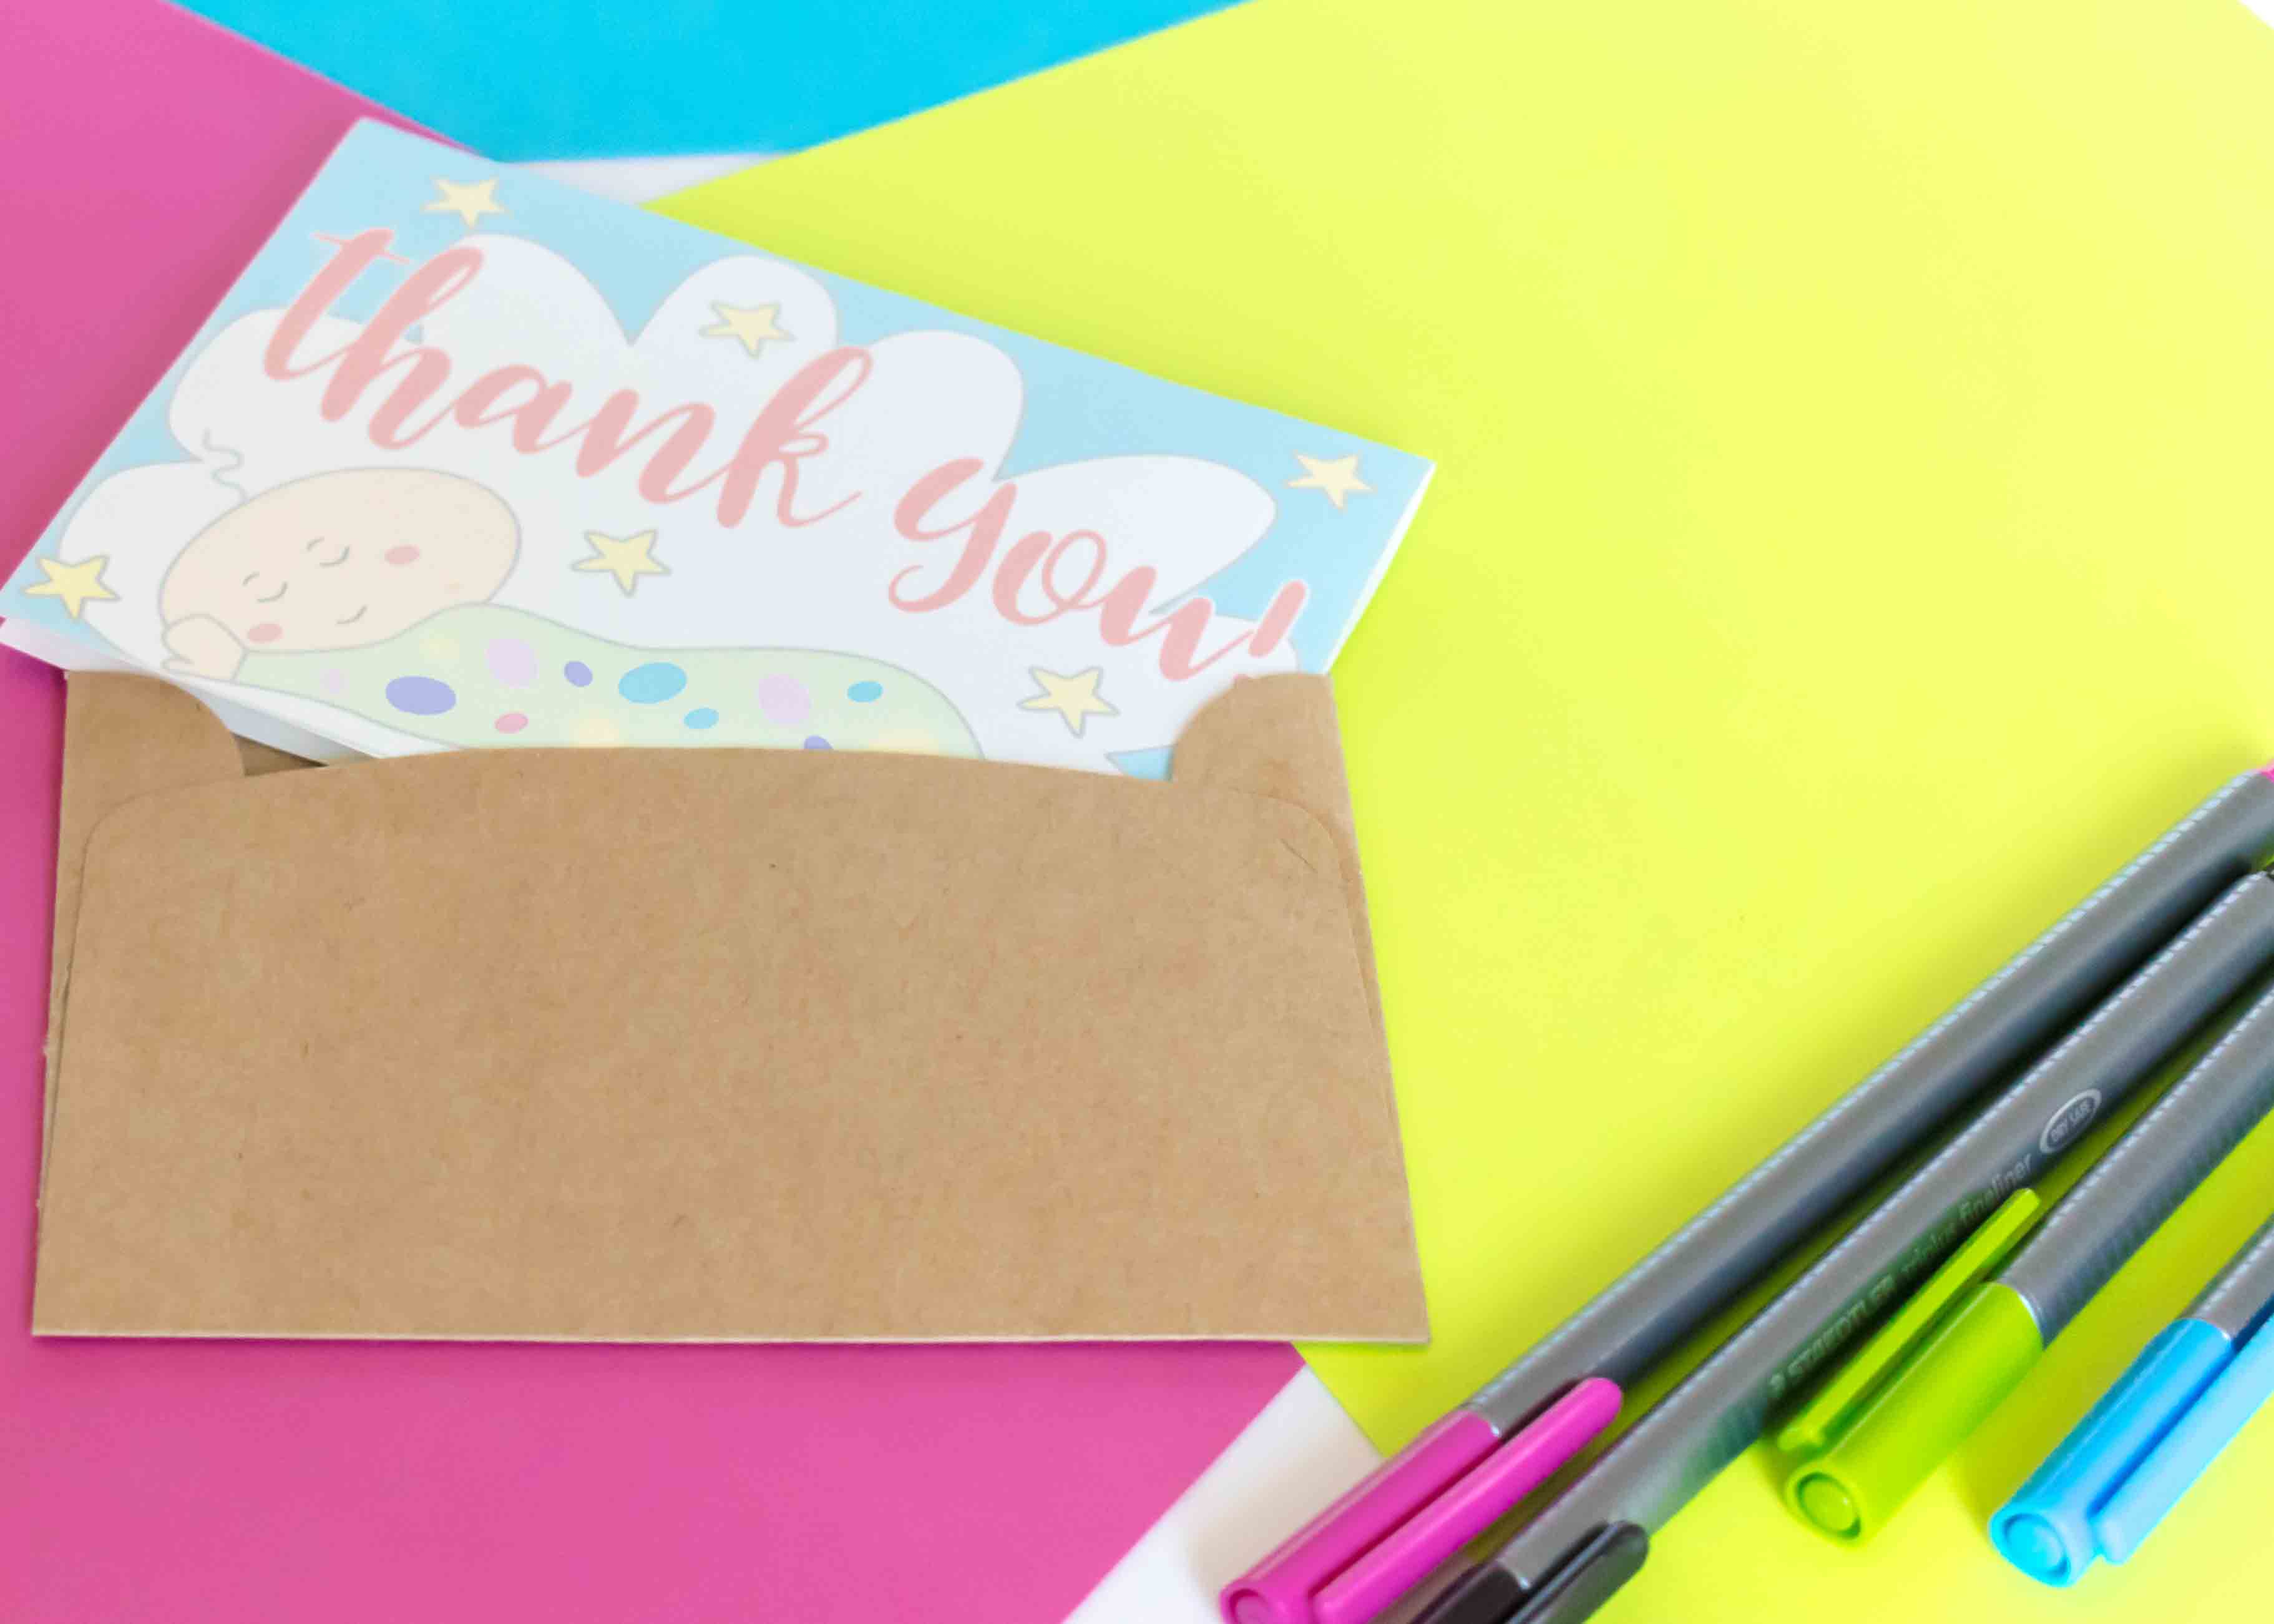 Download Baby Shower Thank You Cards Free Printable Daydream Into Reality